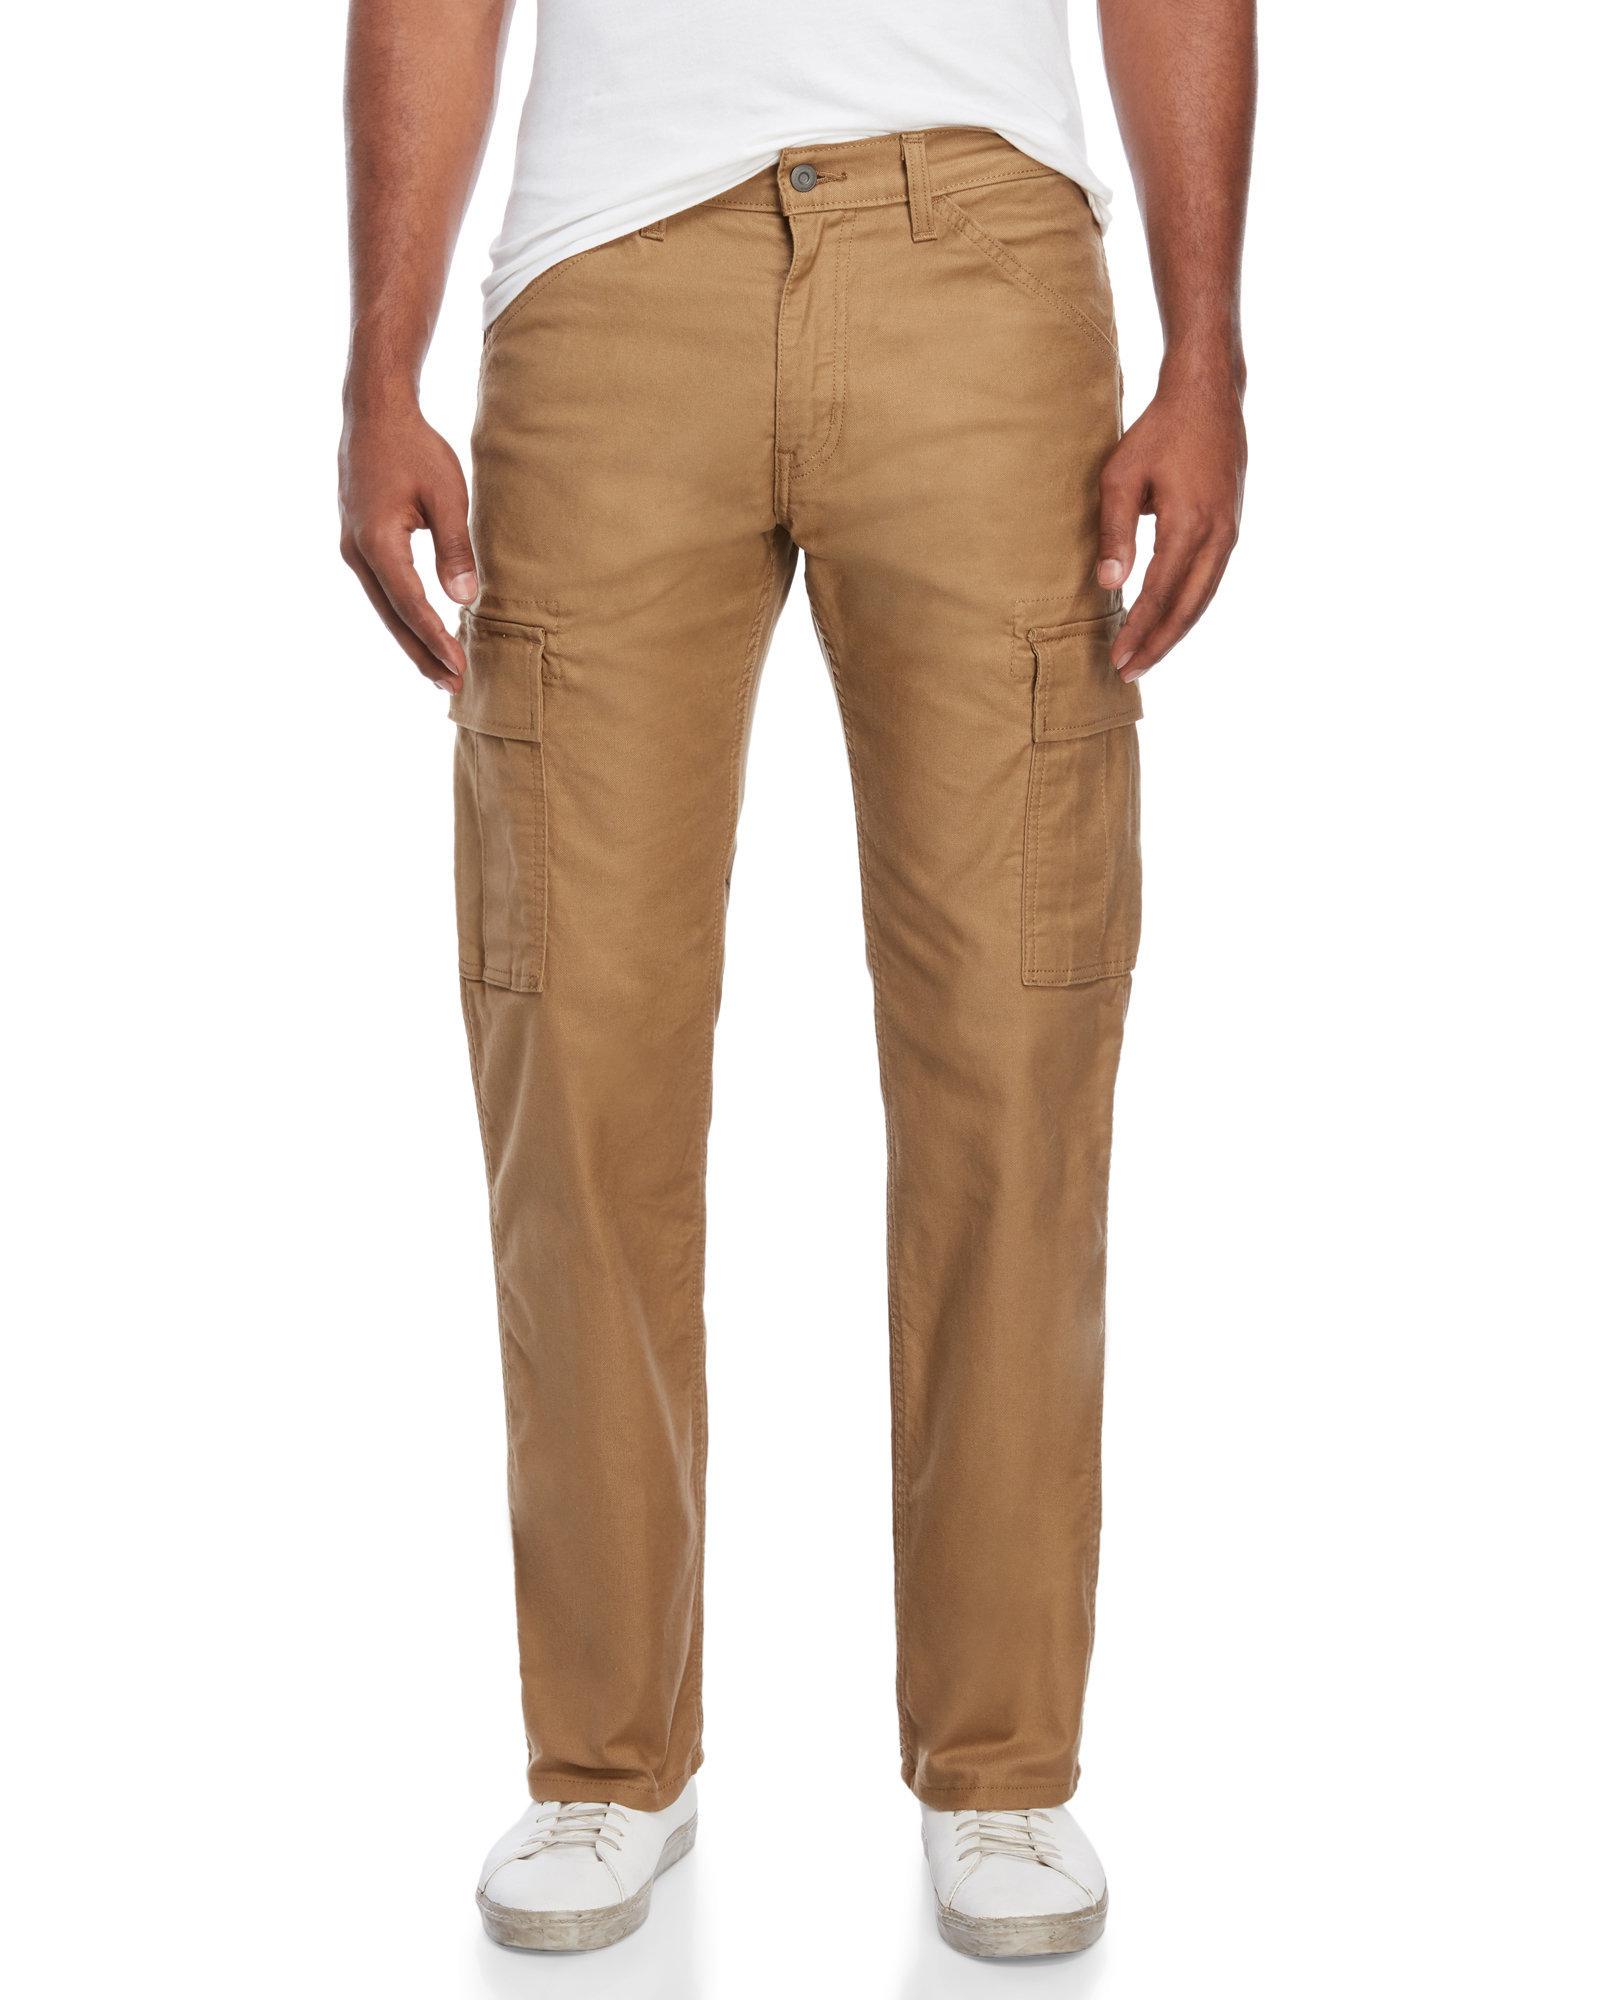 Lyst - Levi's 505 Workwear Cargo Pants in Brown for Men